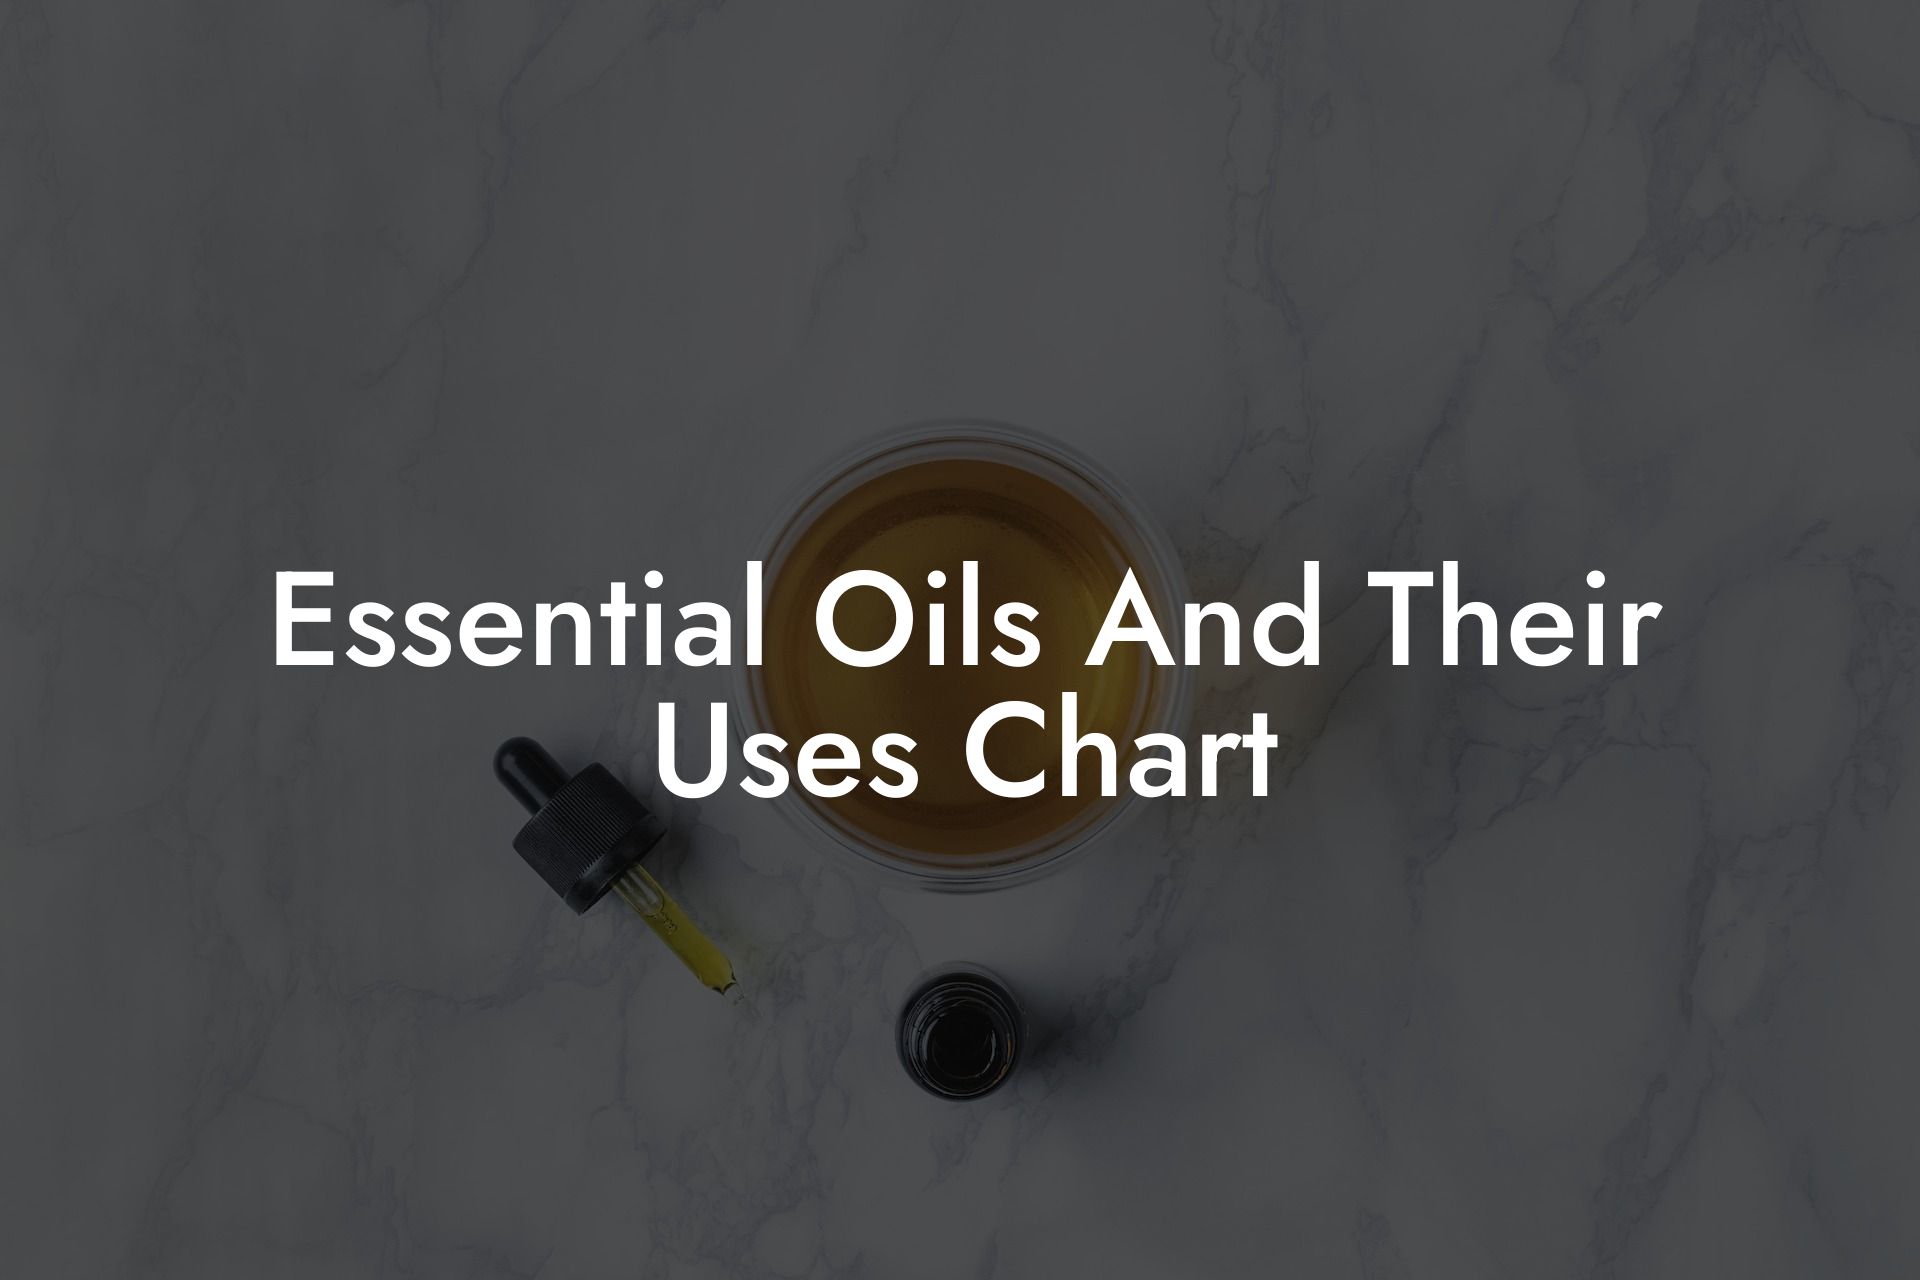 Essential Oils And Their Uses Chart